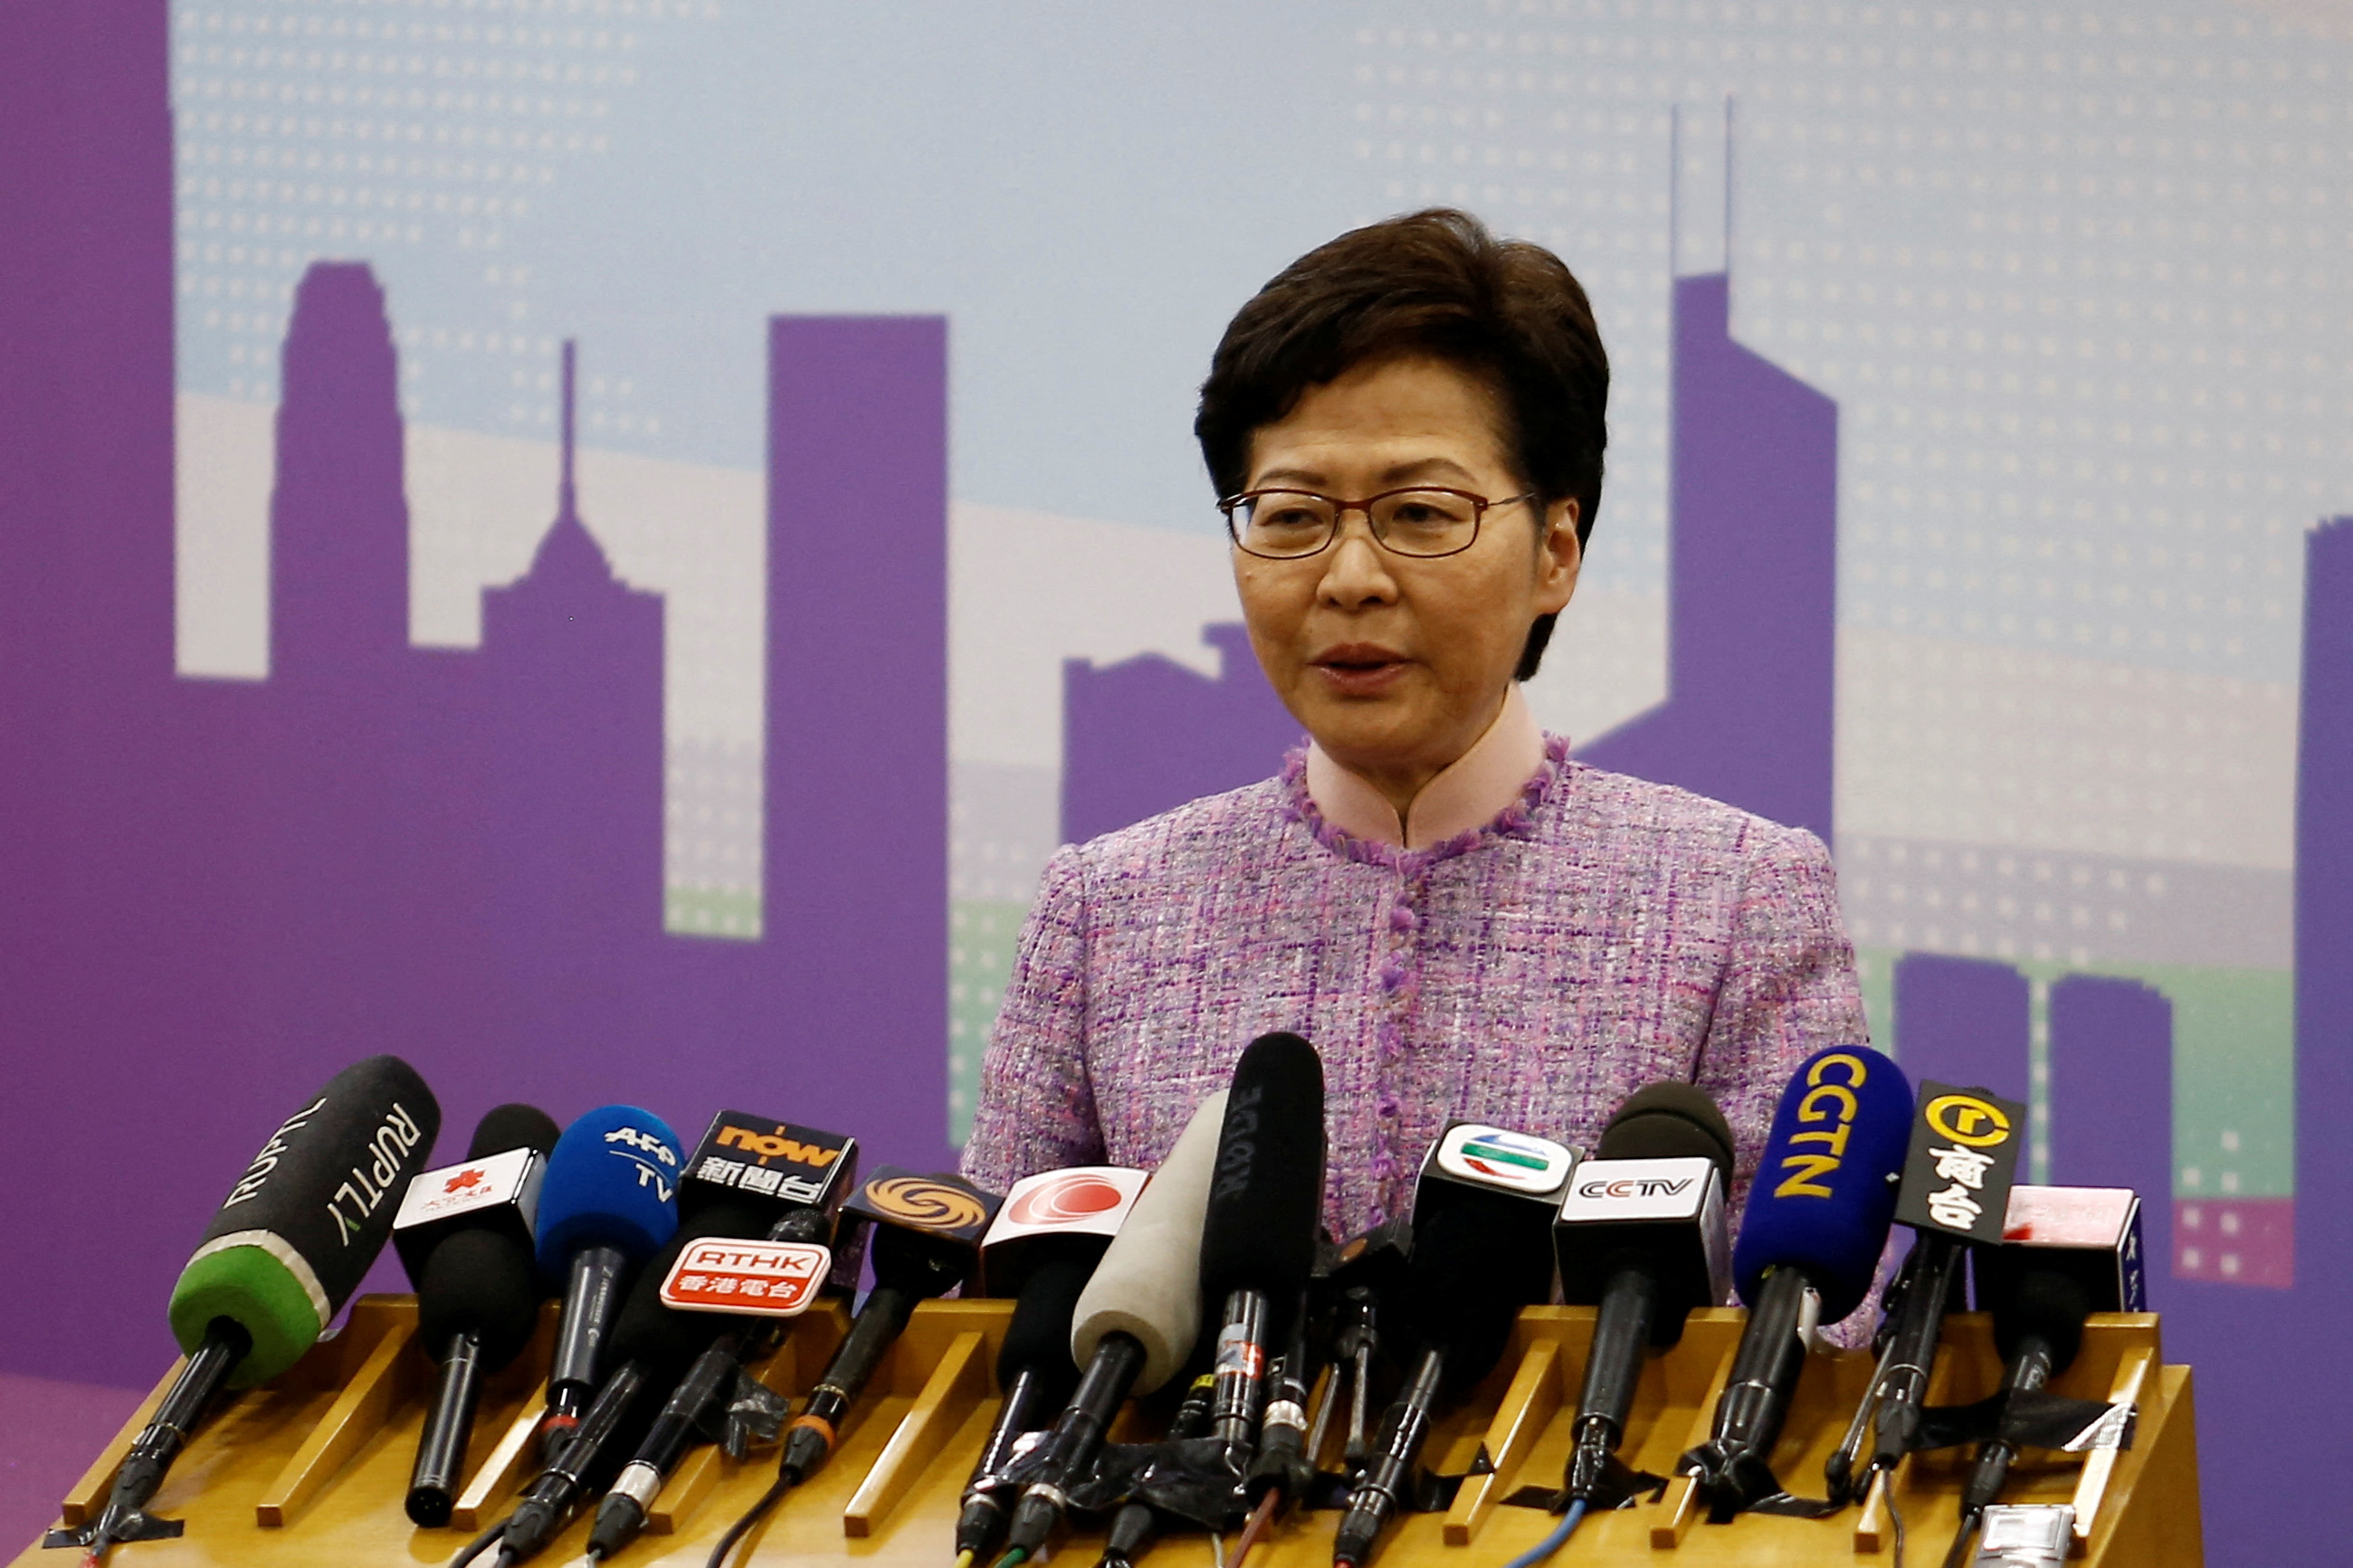 Hong Kong CEO Carrie Lam speaks at a press conference in Beijing, China on December 22, 2021. REUTERS / Shubing Wang